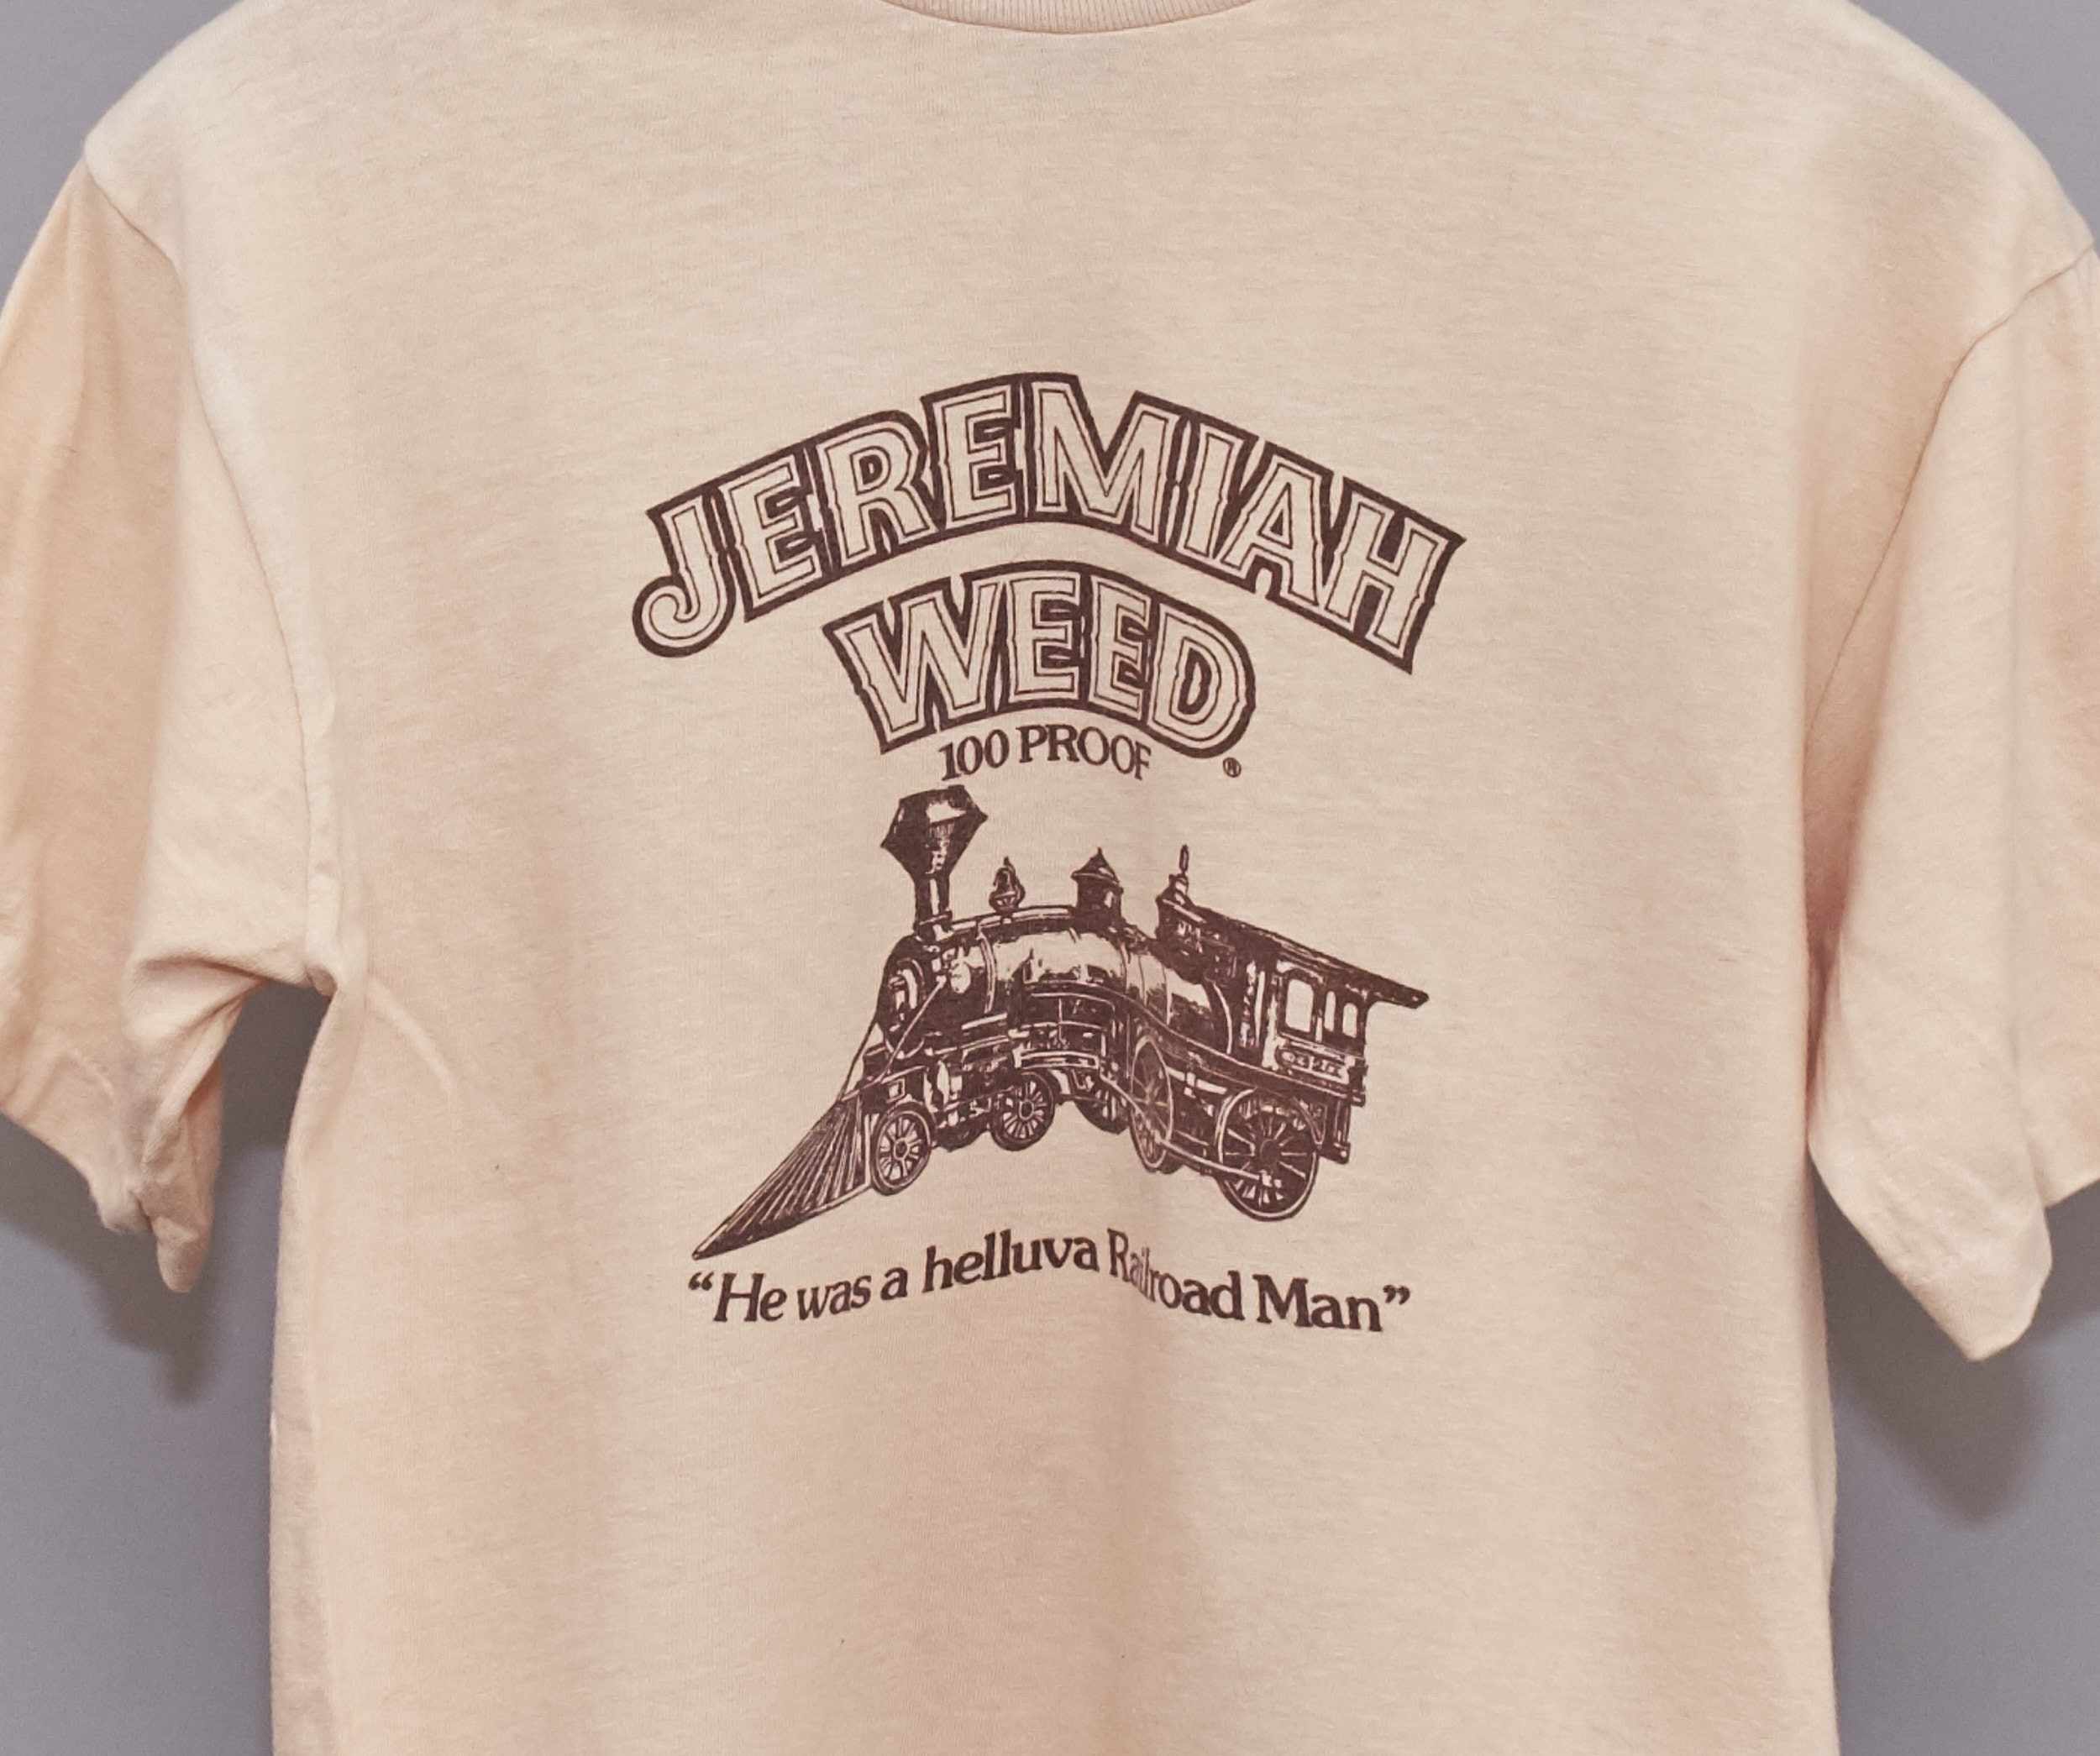 JEREMIAH WEED WOMEN'S T-SHIRT...MADE IN U.S.A....NEW!!! 